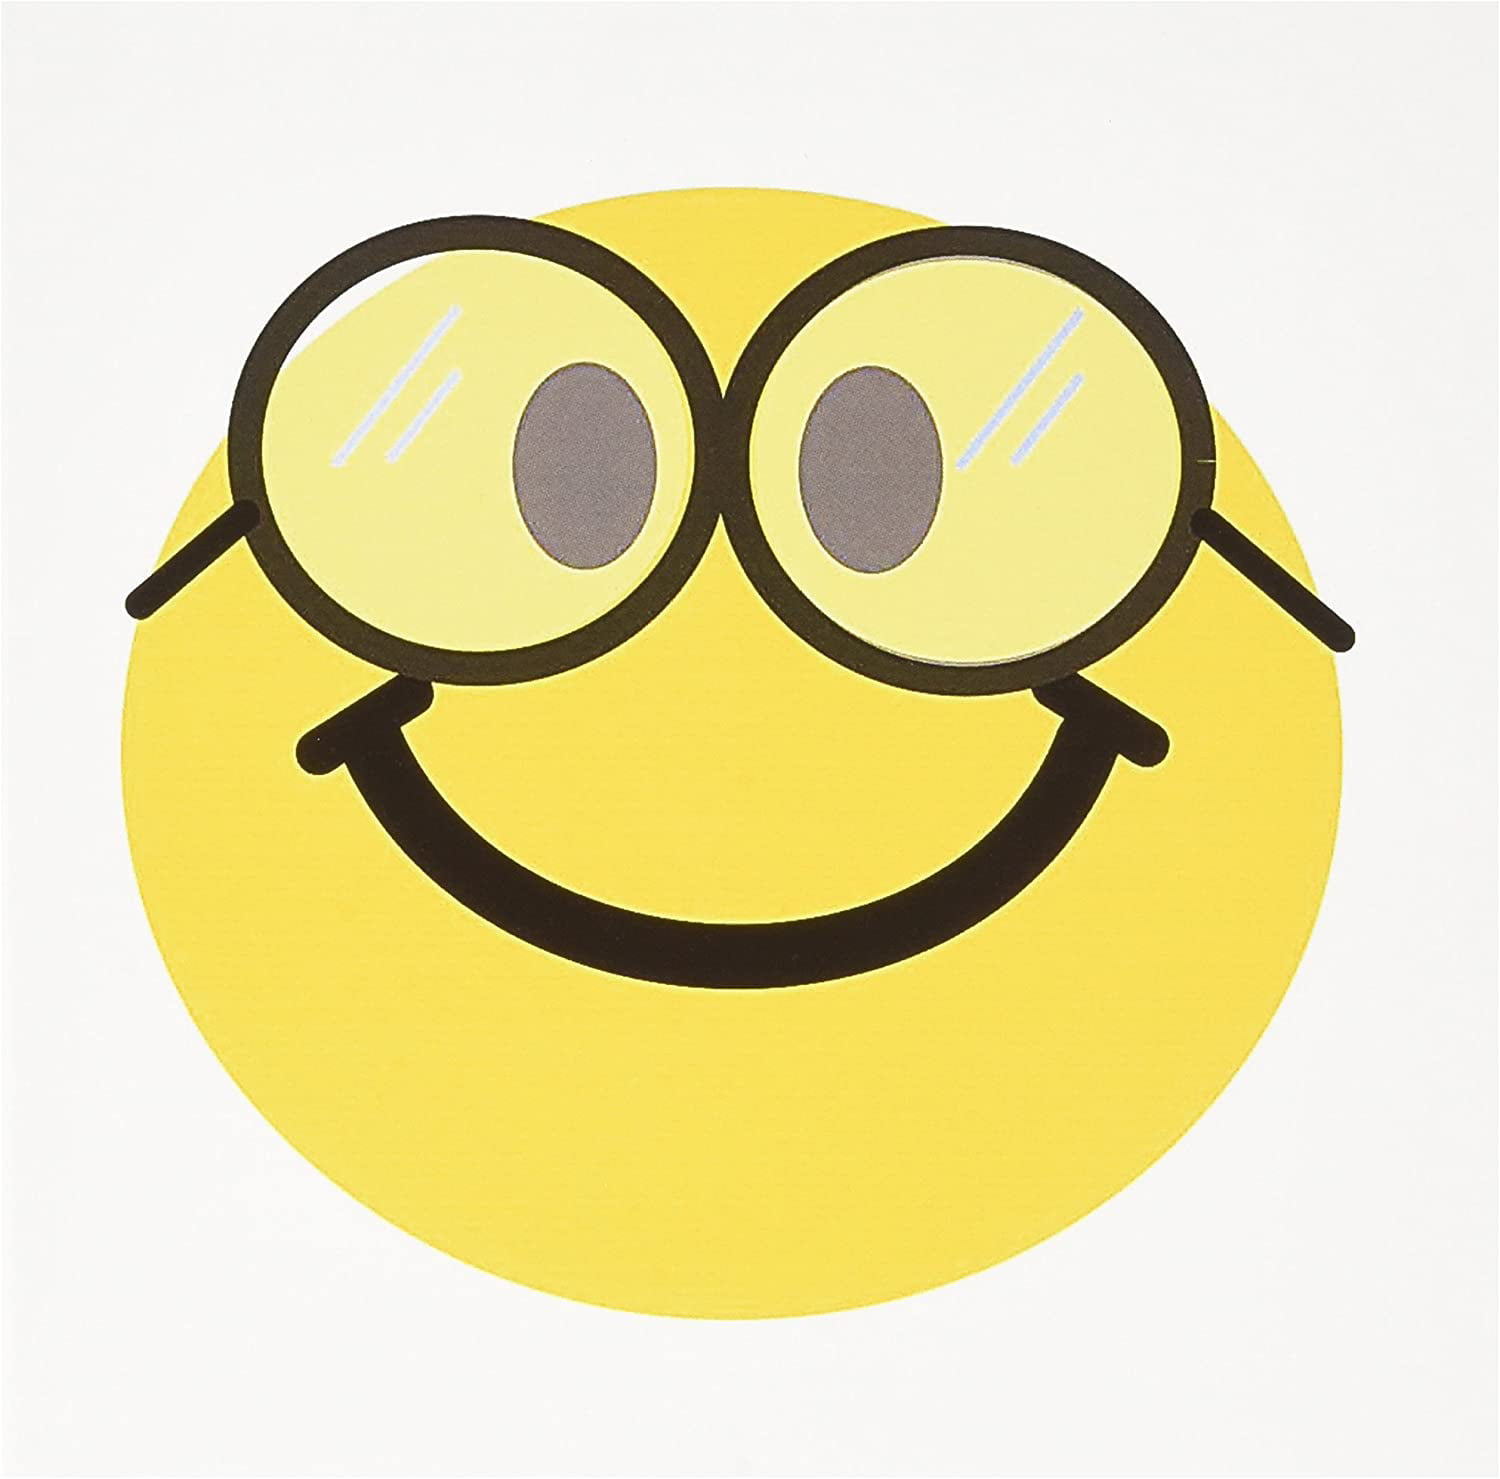 3drose 8 X 8 X 025 Inches Geeky Smiley Face Cute Geek Happy Nerd Yellow Smilie With Glasses 